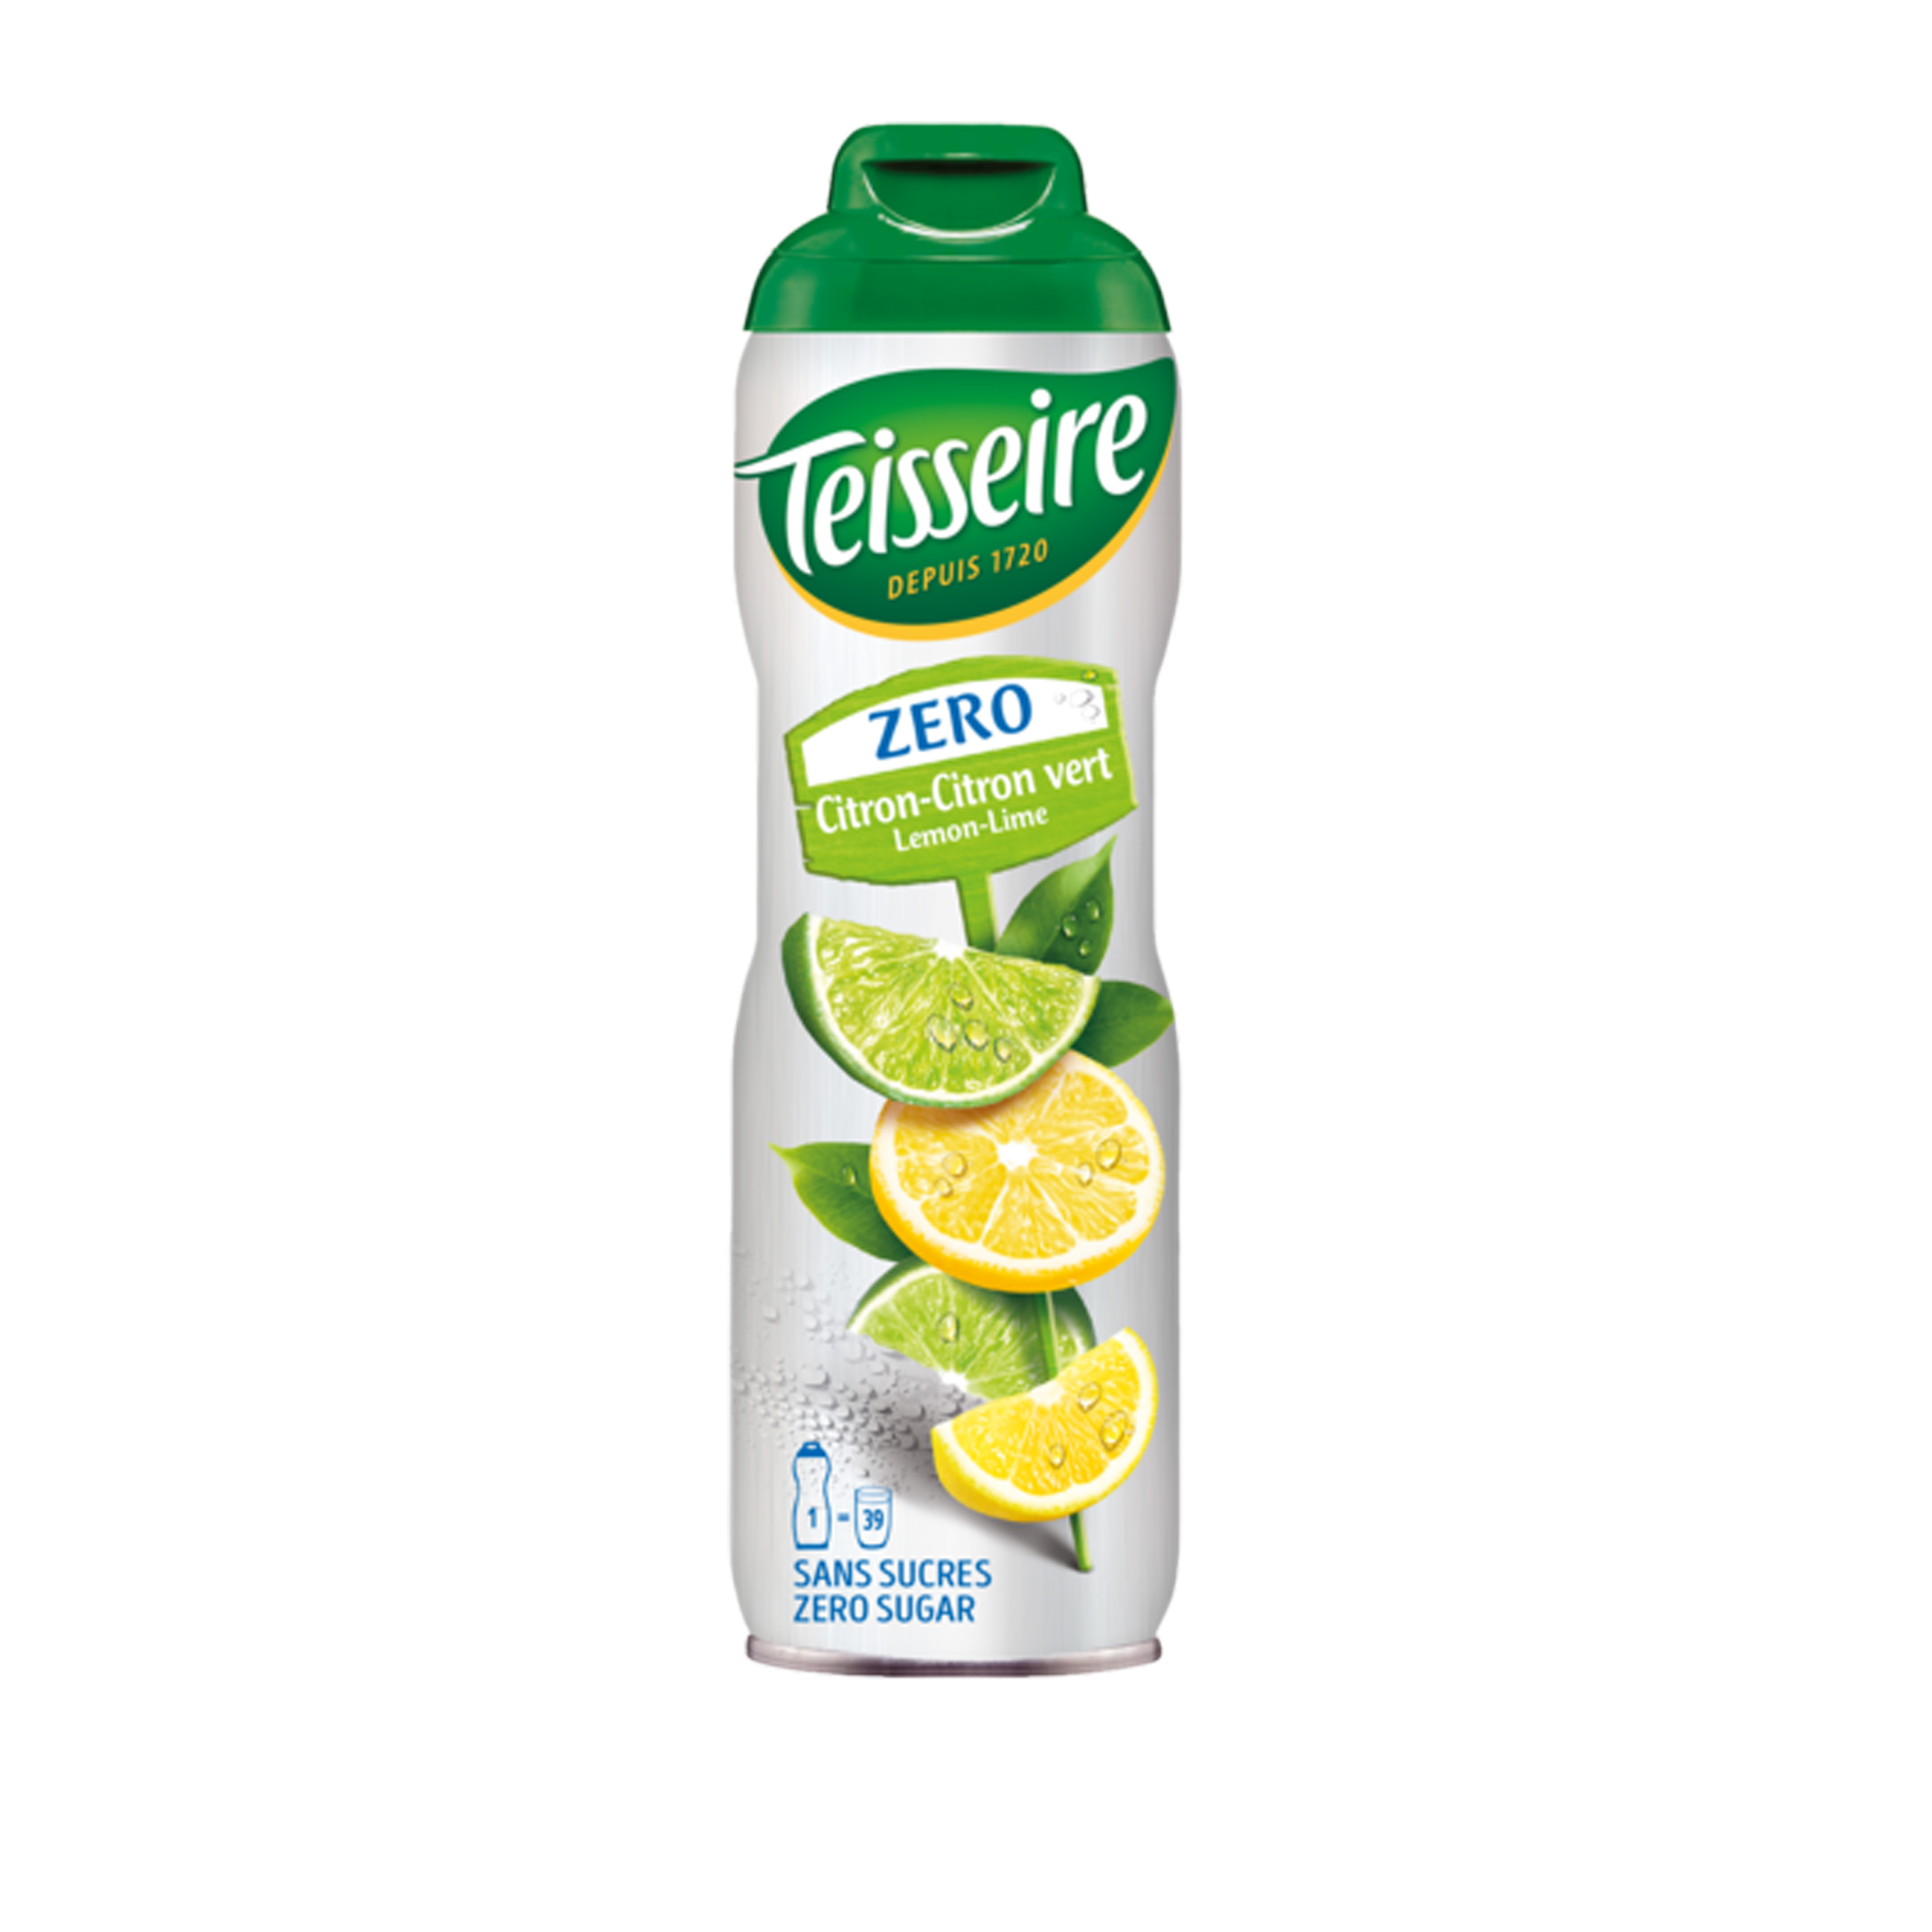 Teisseire sirop lima limon 0% 60 cl.